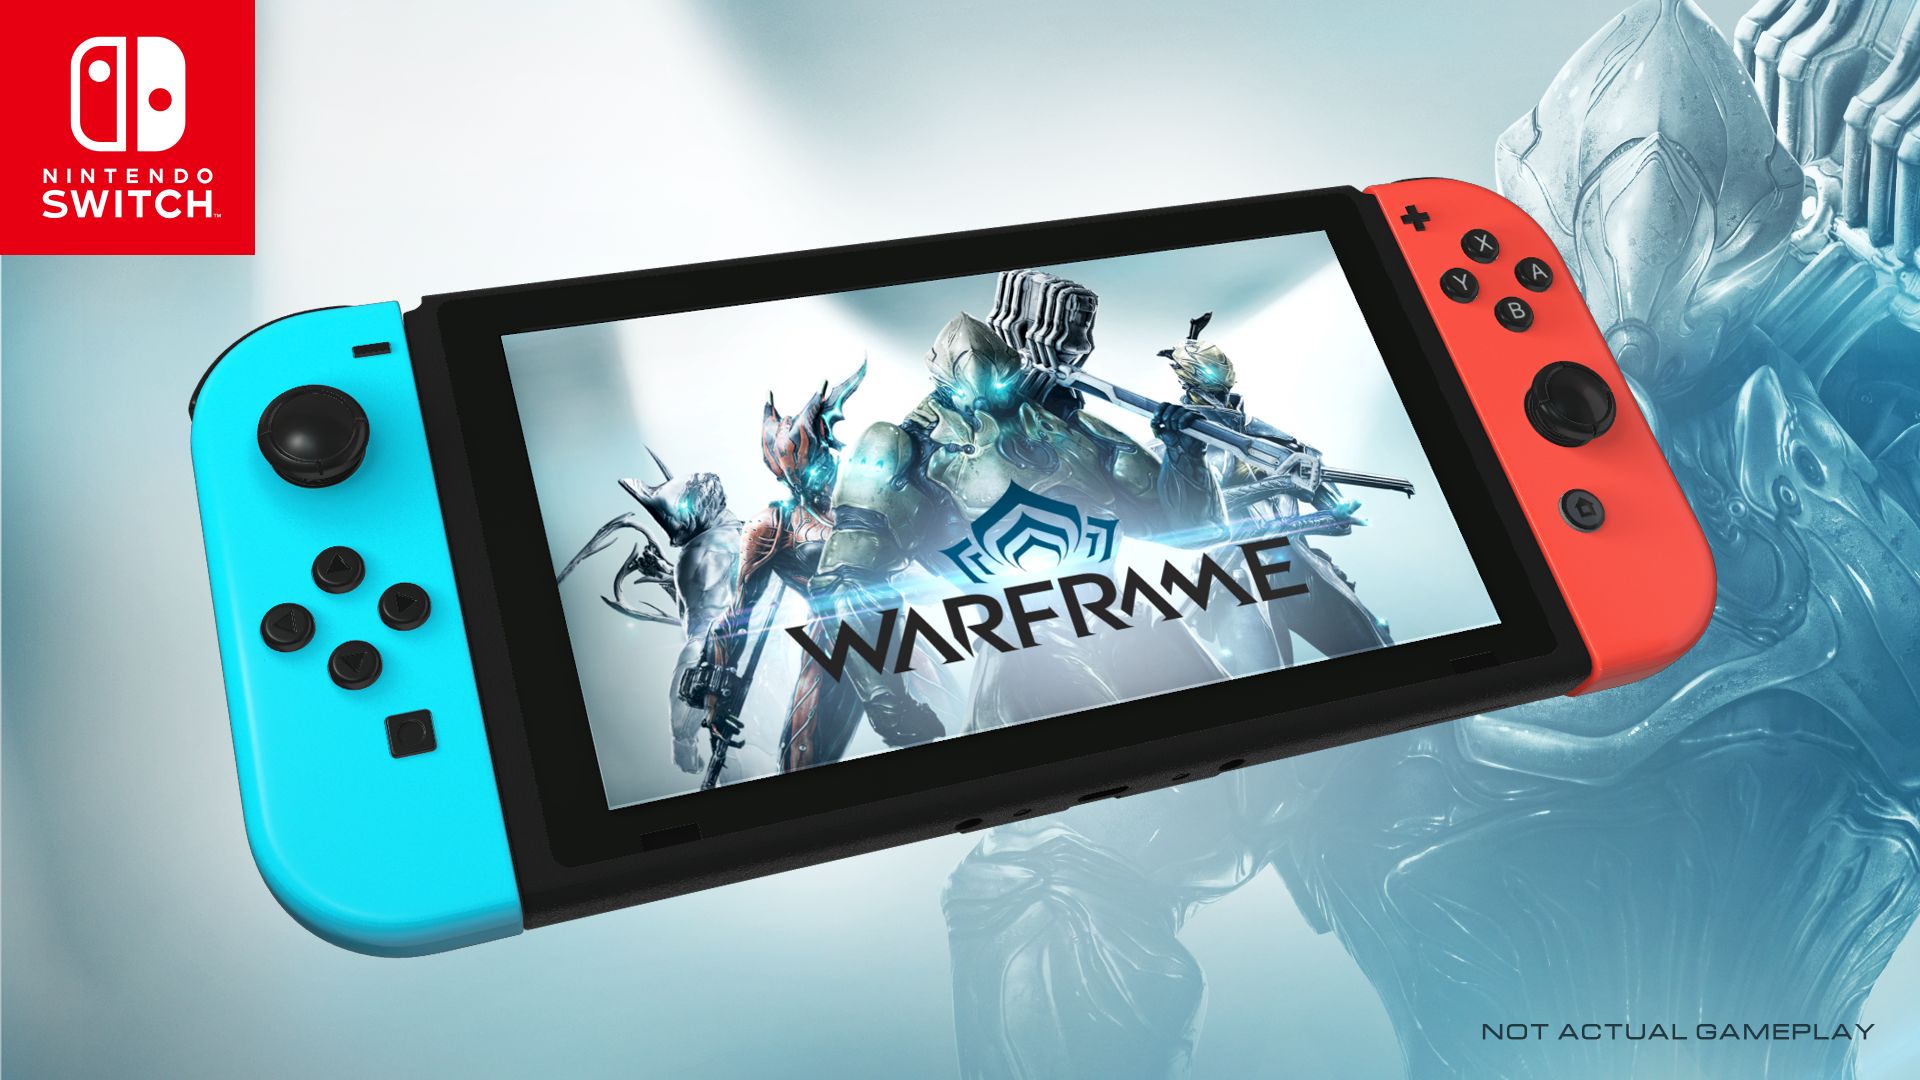 Warframe heads to the Nintendo Switch this November